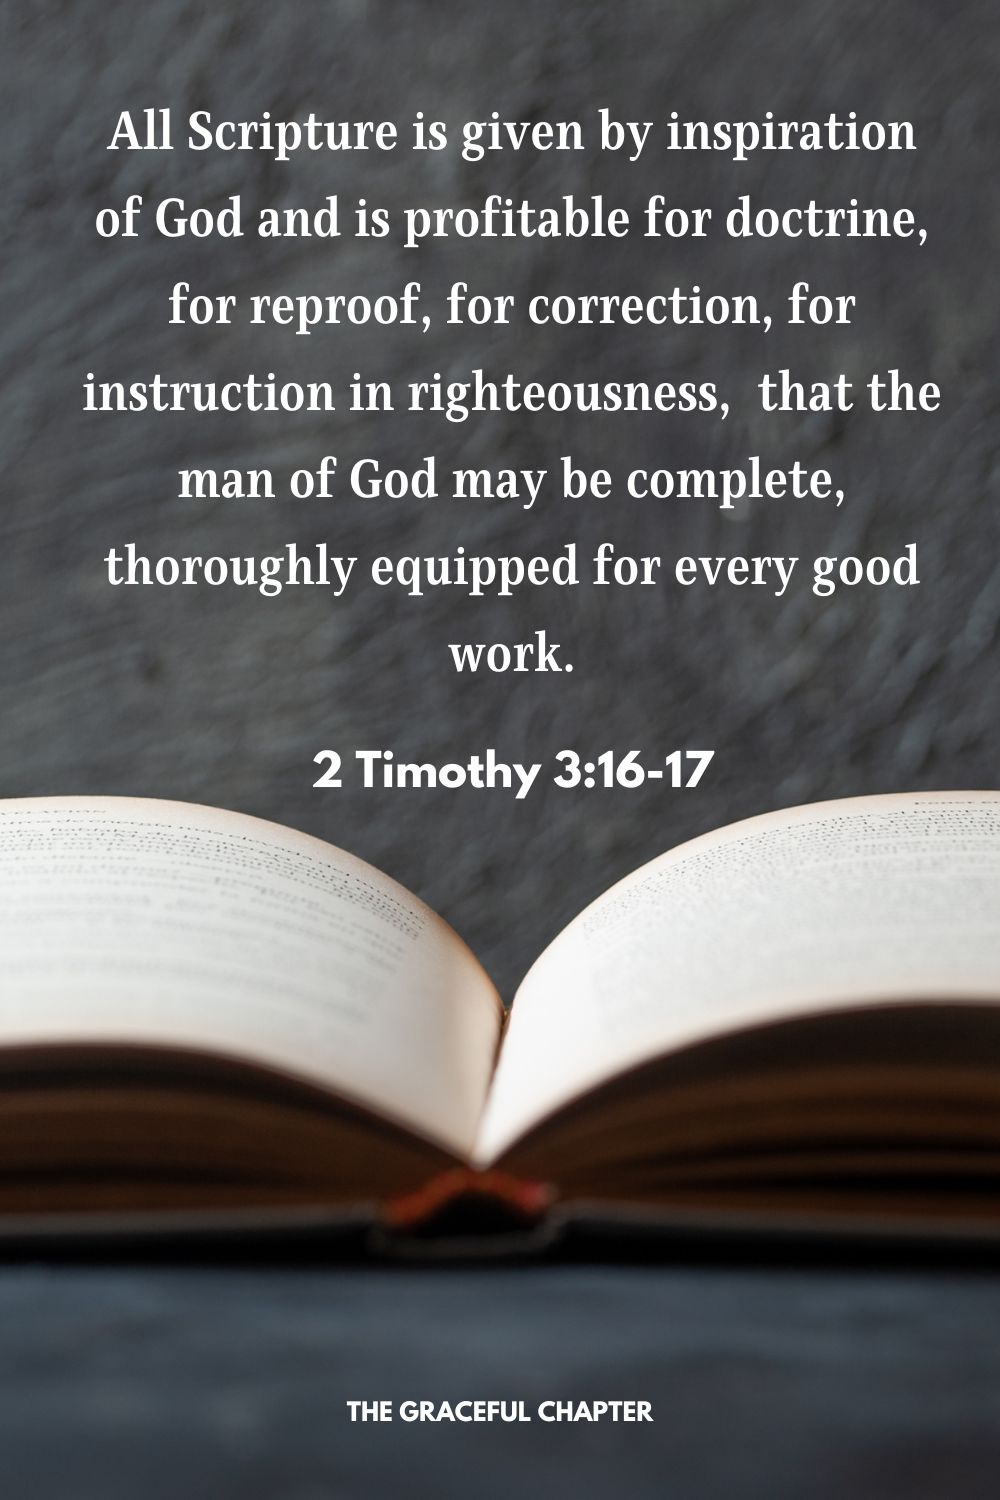 All Scripture is given by inspiration of God and is profitable for doctrine, for reproof, for correction, for instruction in righteousness,  that the man of God may be complete, thoroughly equipped for every good work. 2 Timothy 3:16-17